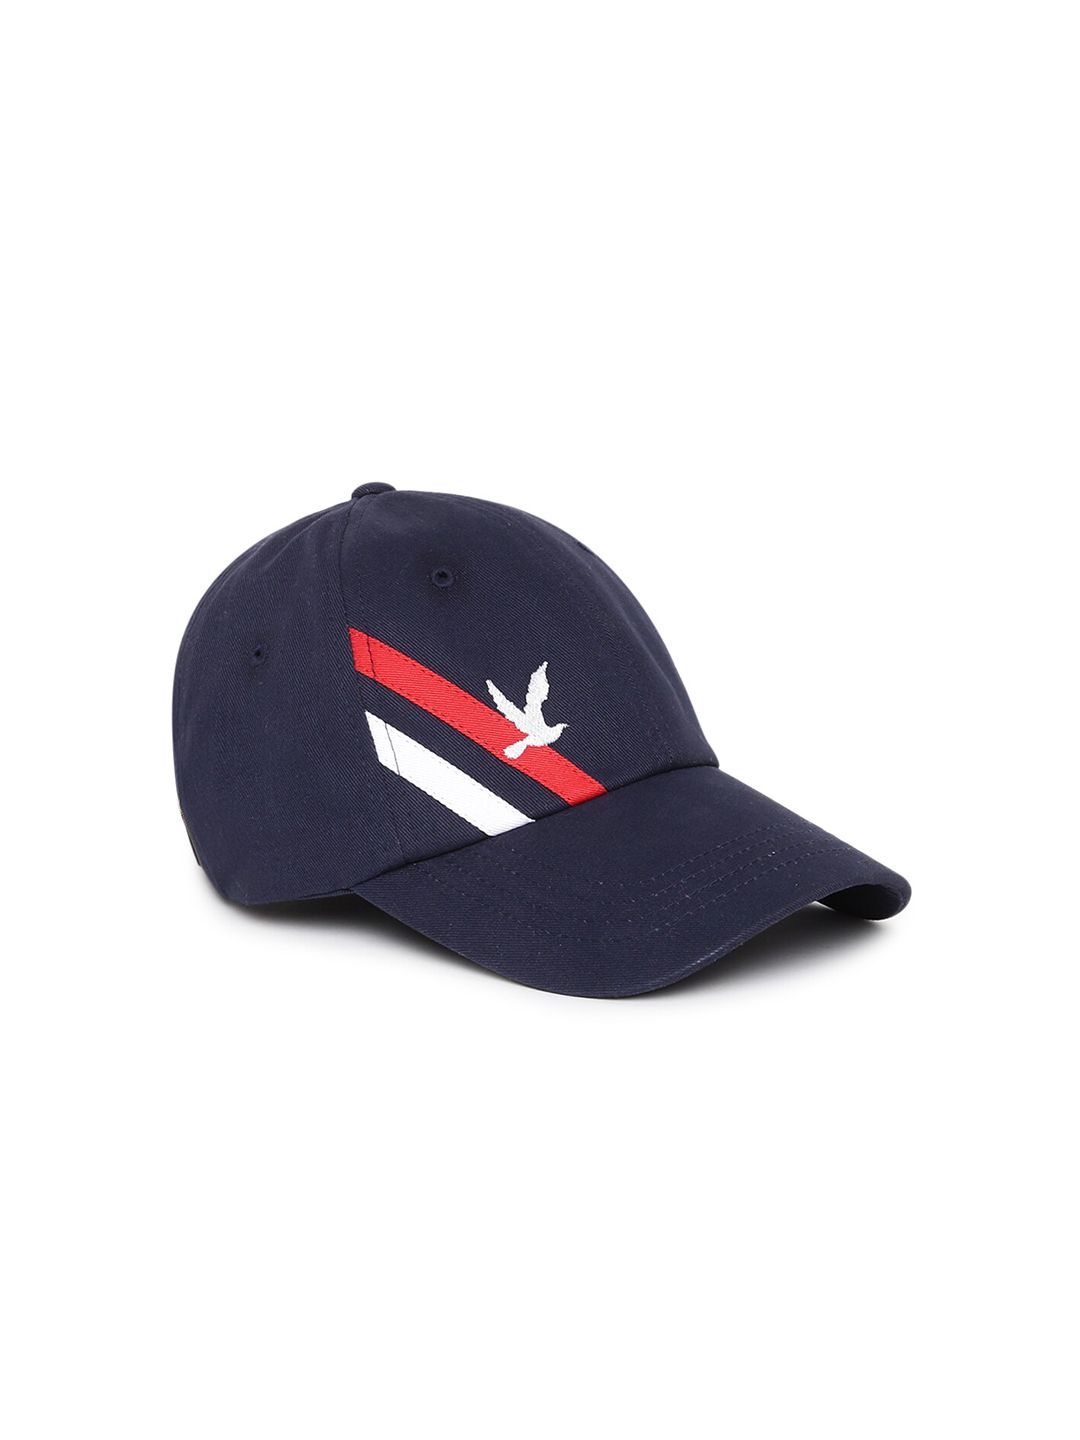 MR BUTTON Unisex Navy Blue & Red Embroidered Baseball Cap Price in India